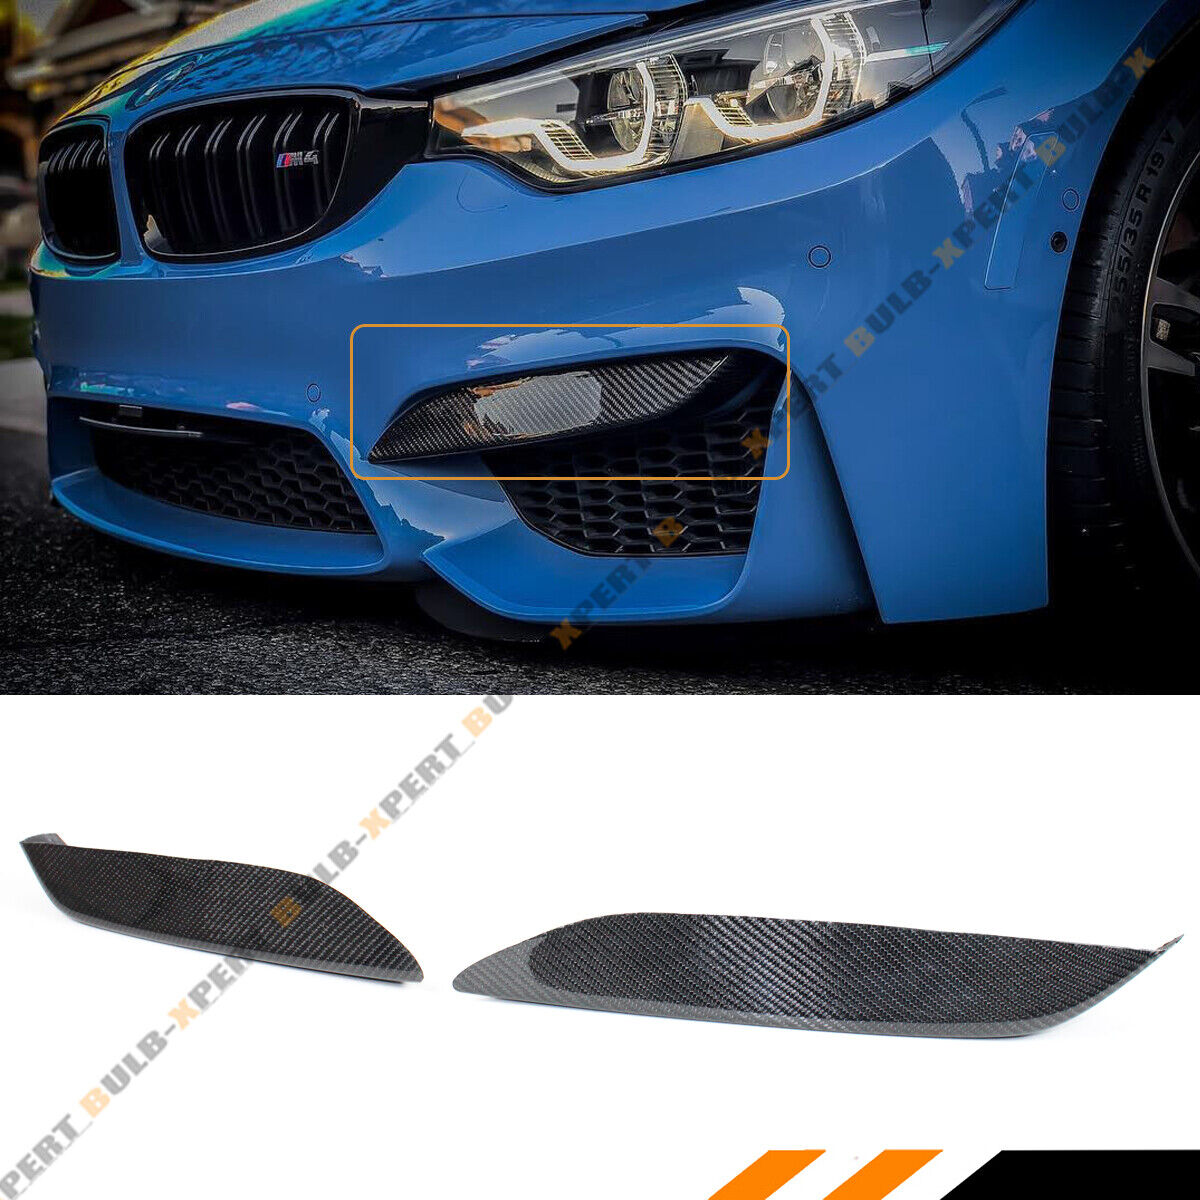 FOR 15-19 BMW F80 M3 F82 F83 M4 CARBON FIBER FRONT BUMPER AIR VENT EYELID COVERS